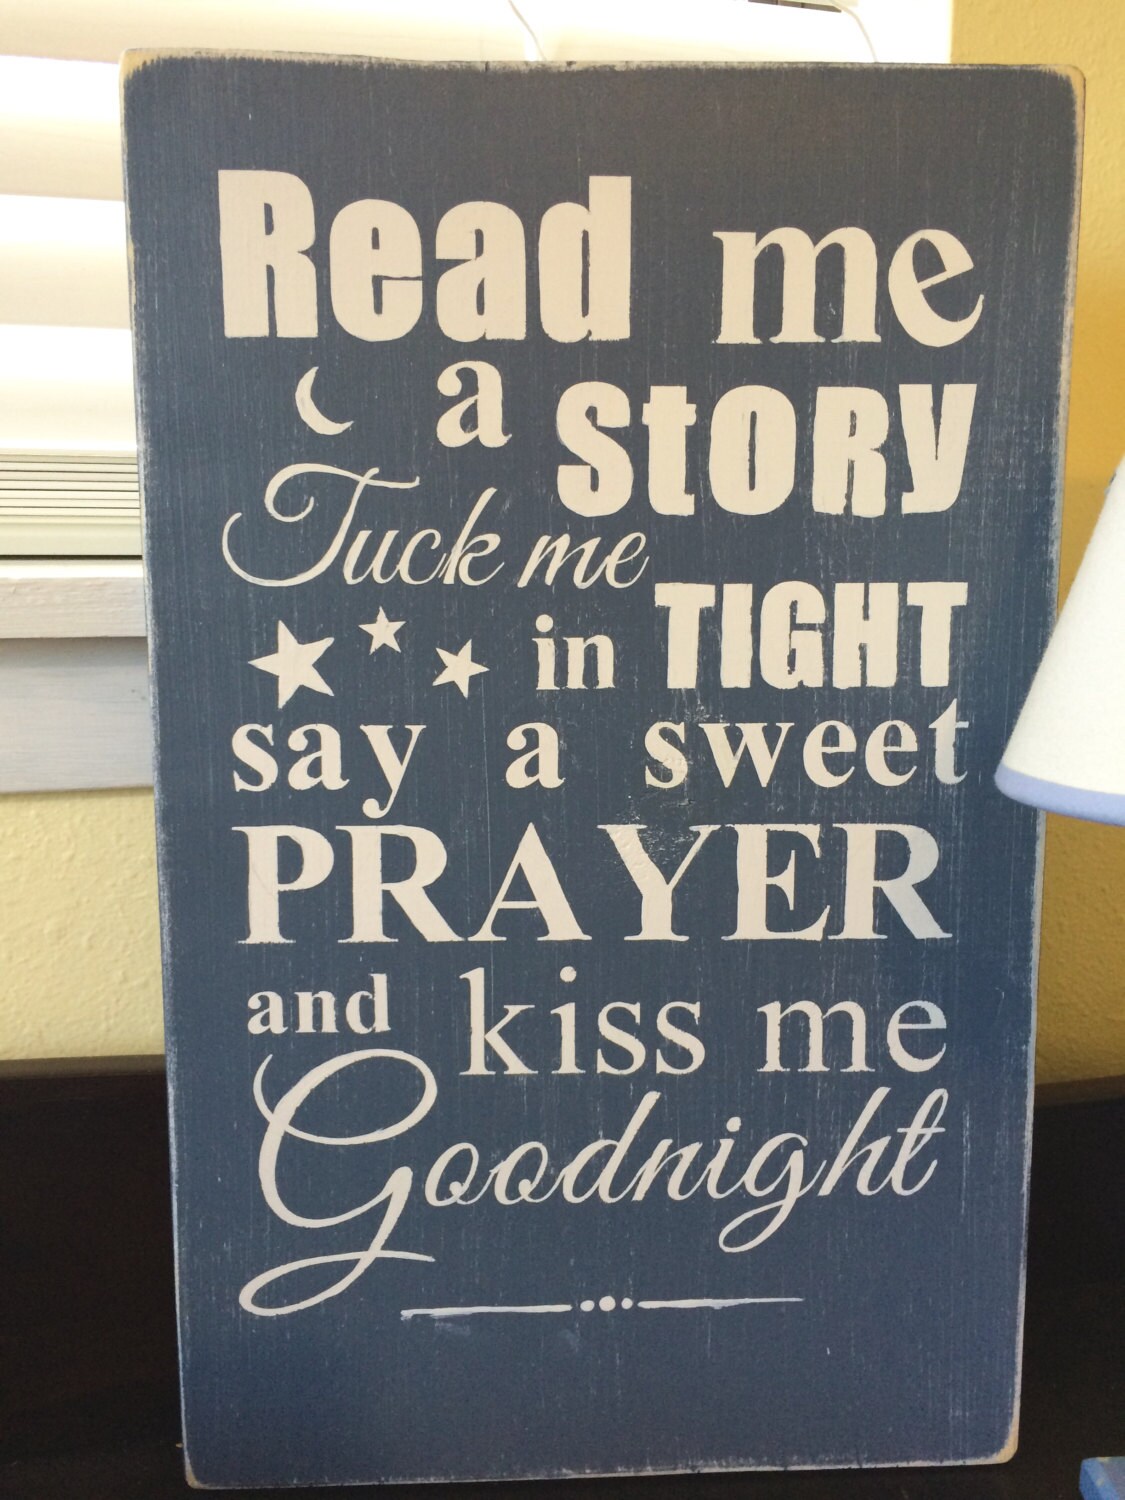 Read me a story tuck me in tight say a sweet prayer & kiss | Etsy